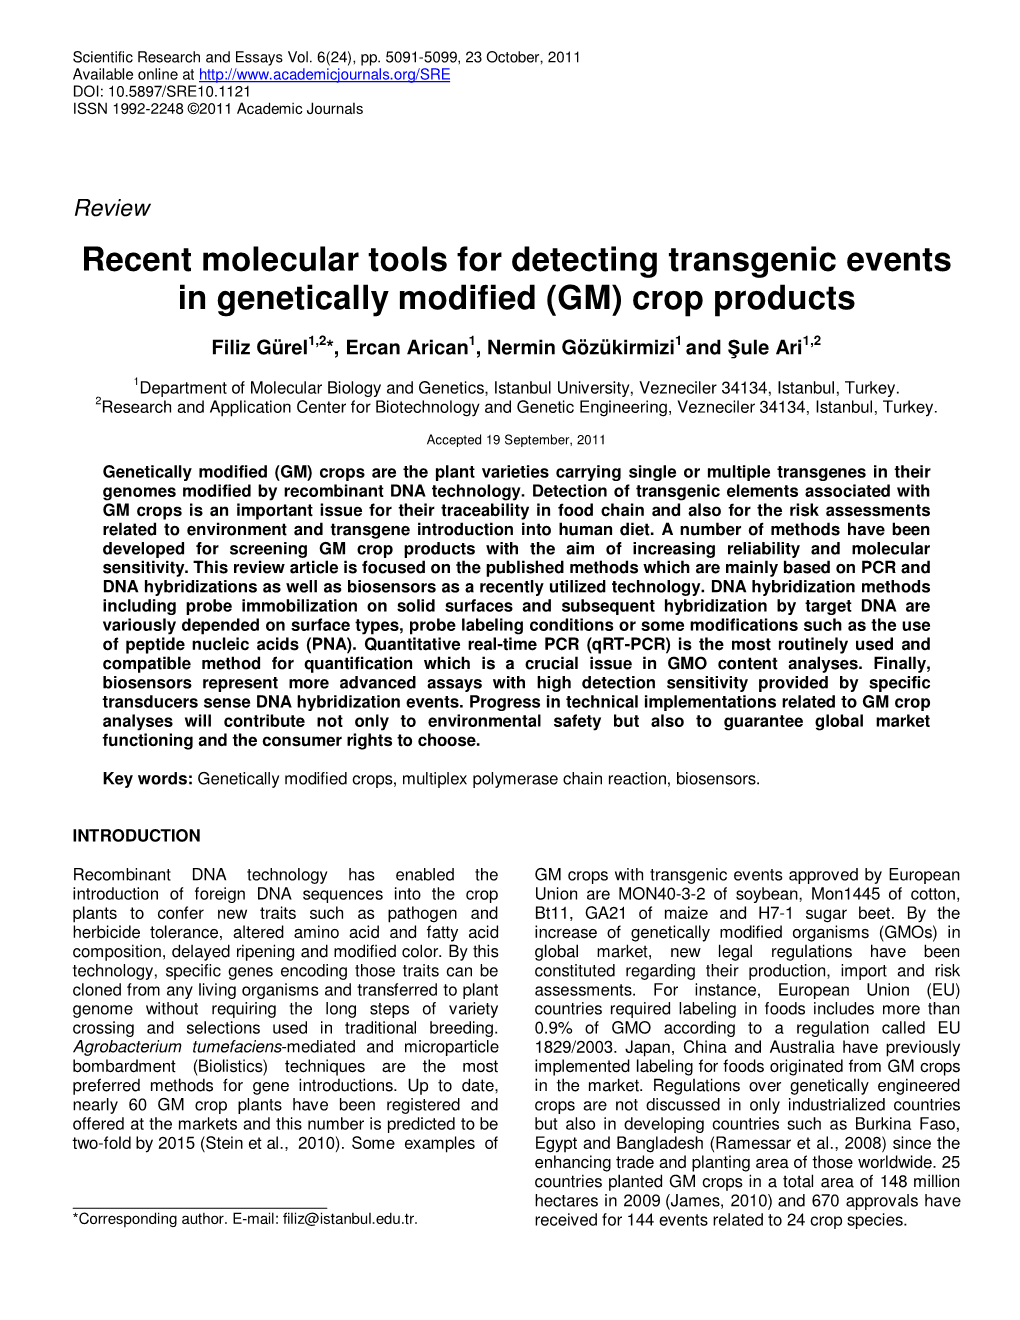 Recent Molecular Tools for Detecting Transgenic Events in Genetically Modified (GM) Crop Products